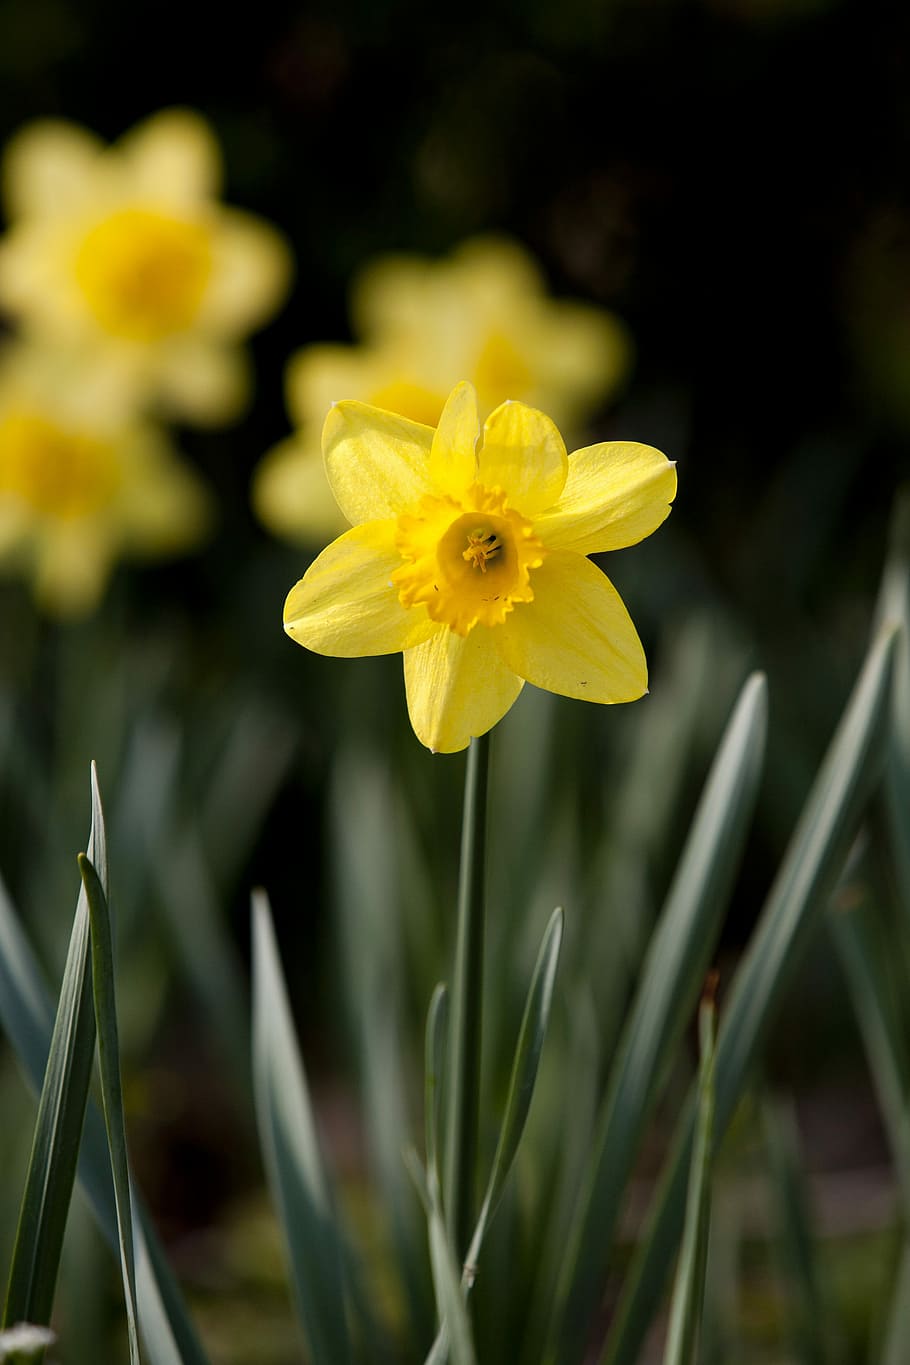 Spring Flowers, Nature, Plants, flowers, spring, beautiful, out of focus, little flower, april, yellow flower